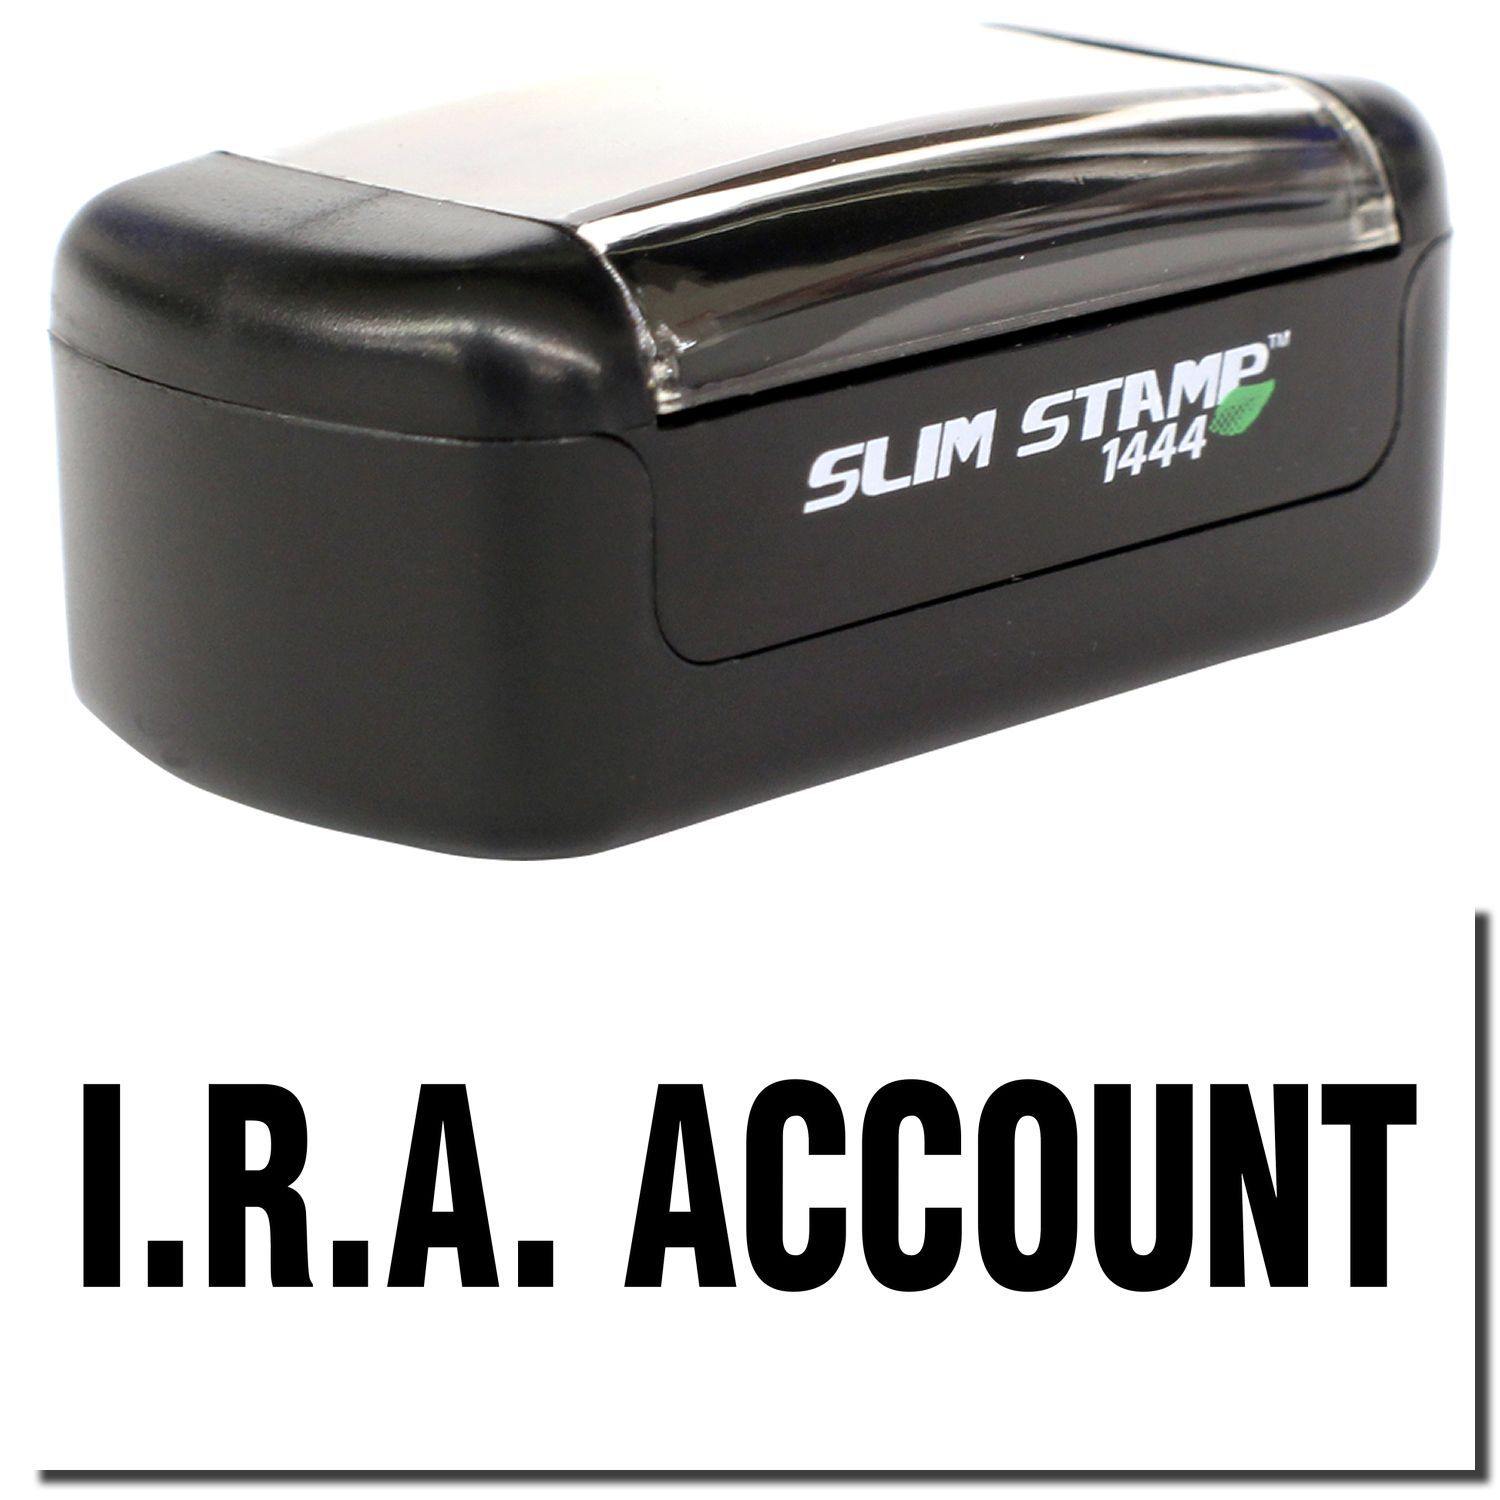 A stock office pre-inked stamp with a stamped image showing how the text "I.R.A. ACCOUNT" is displayed after stamping.